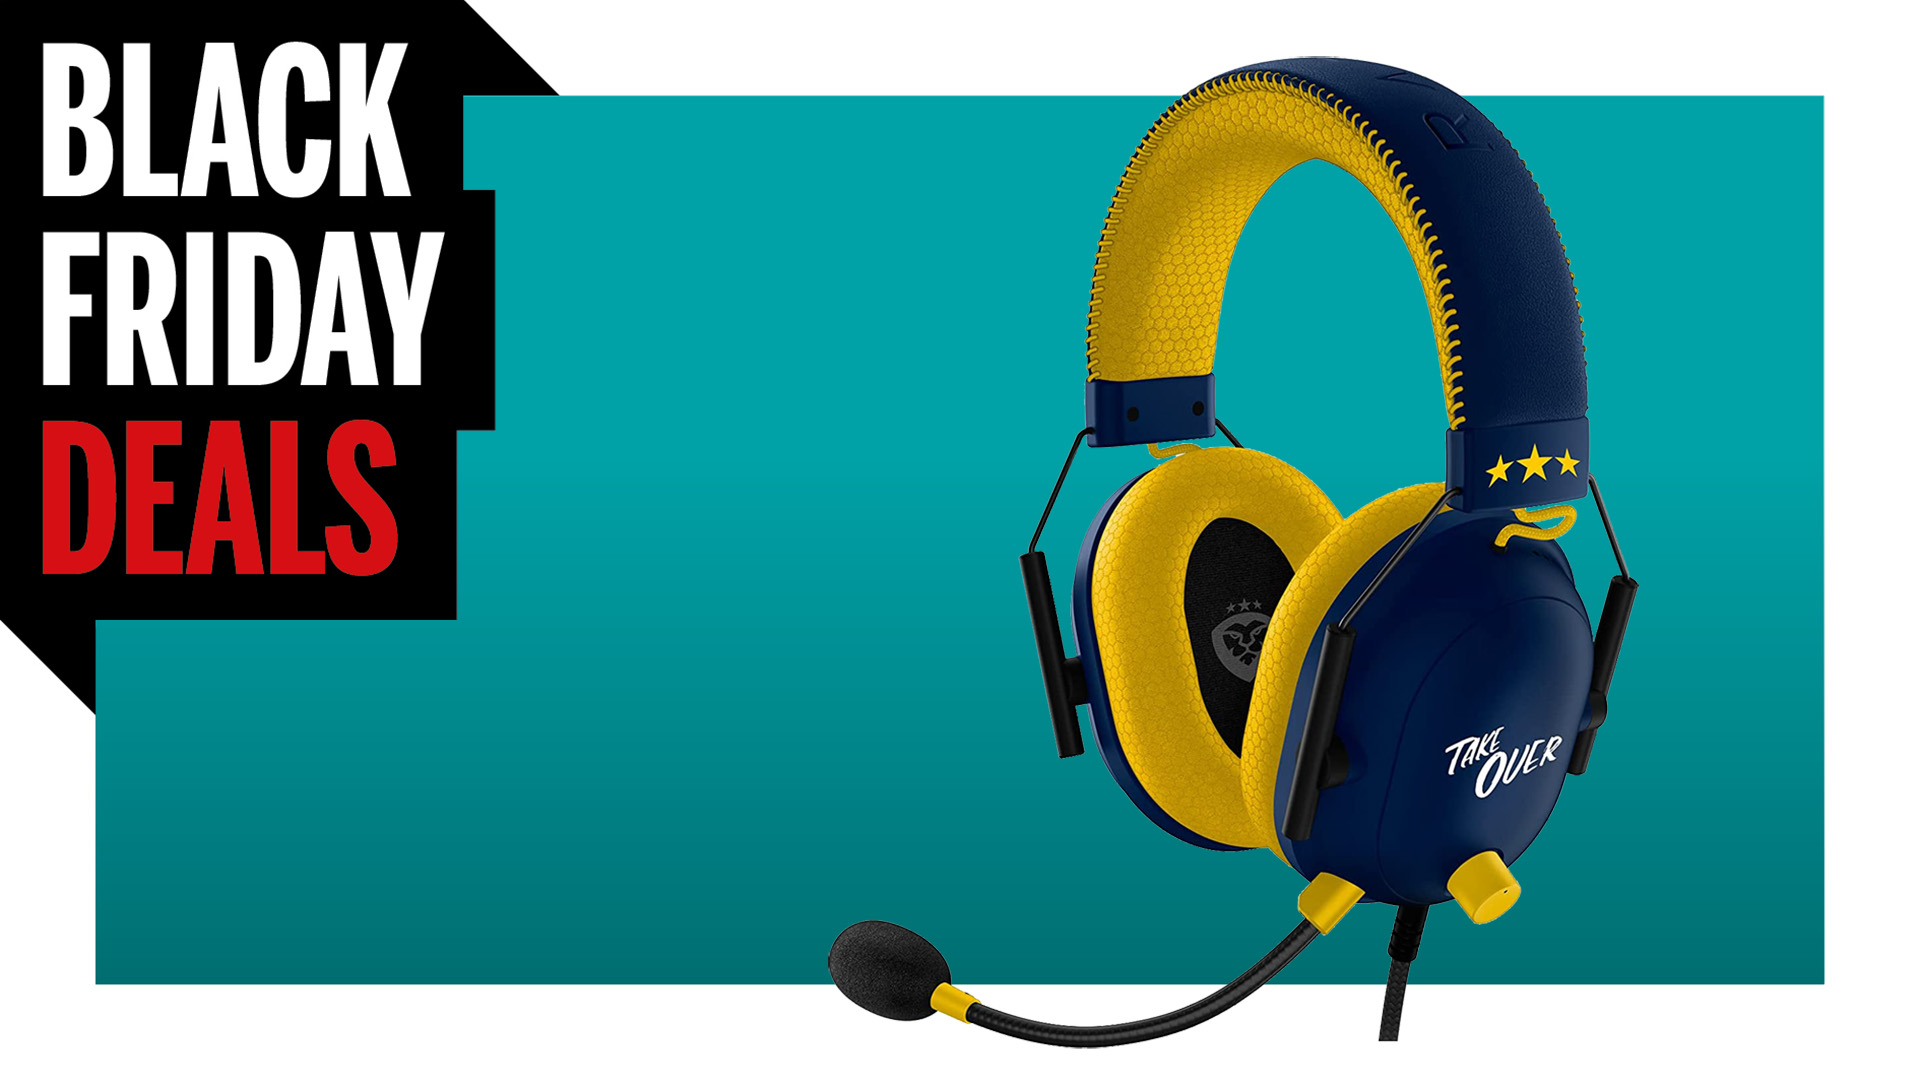  The best gaming headset is on sale for $54.99 for Black Friday 